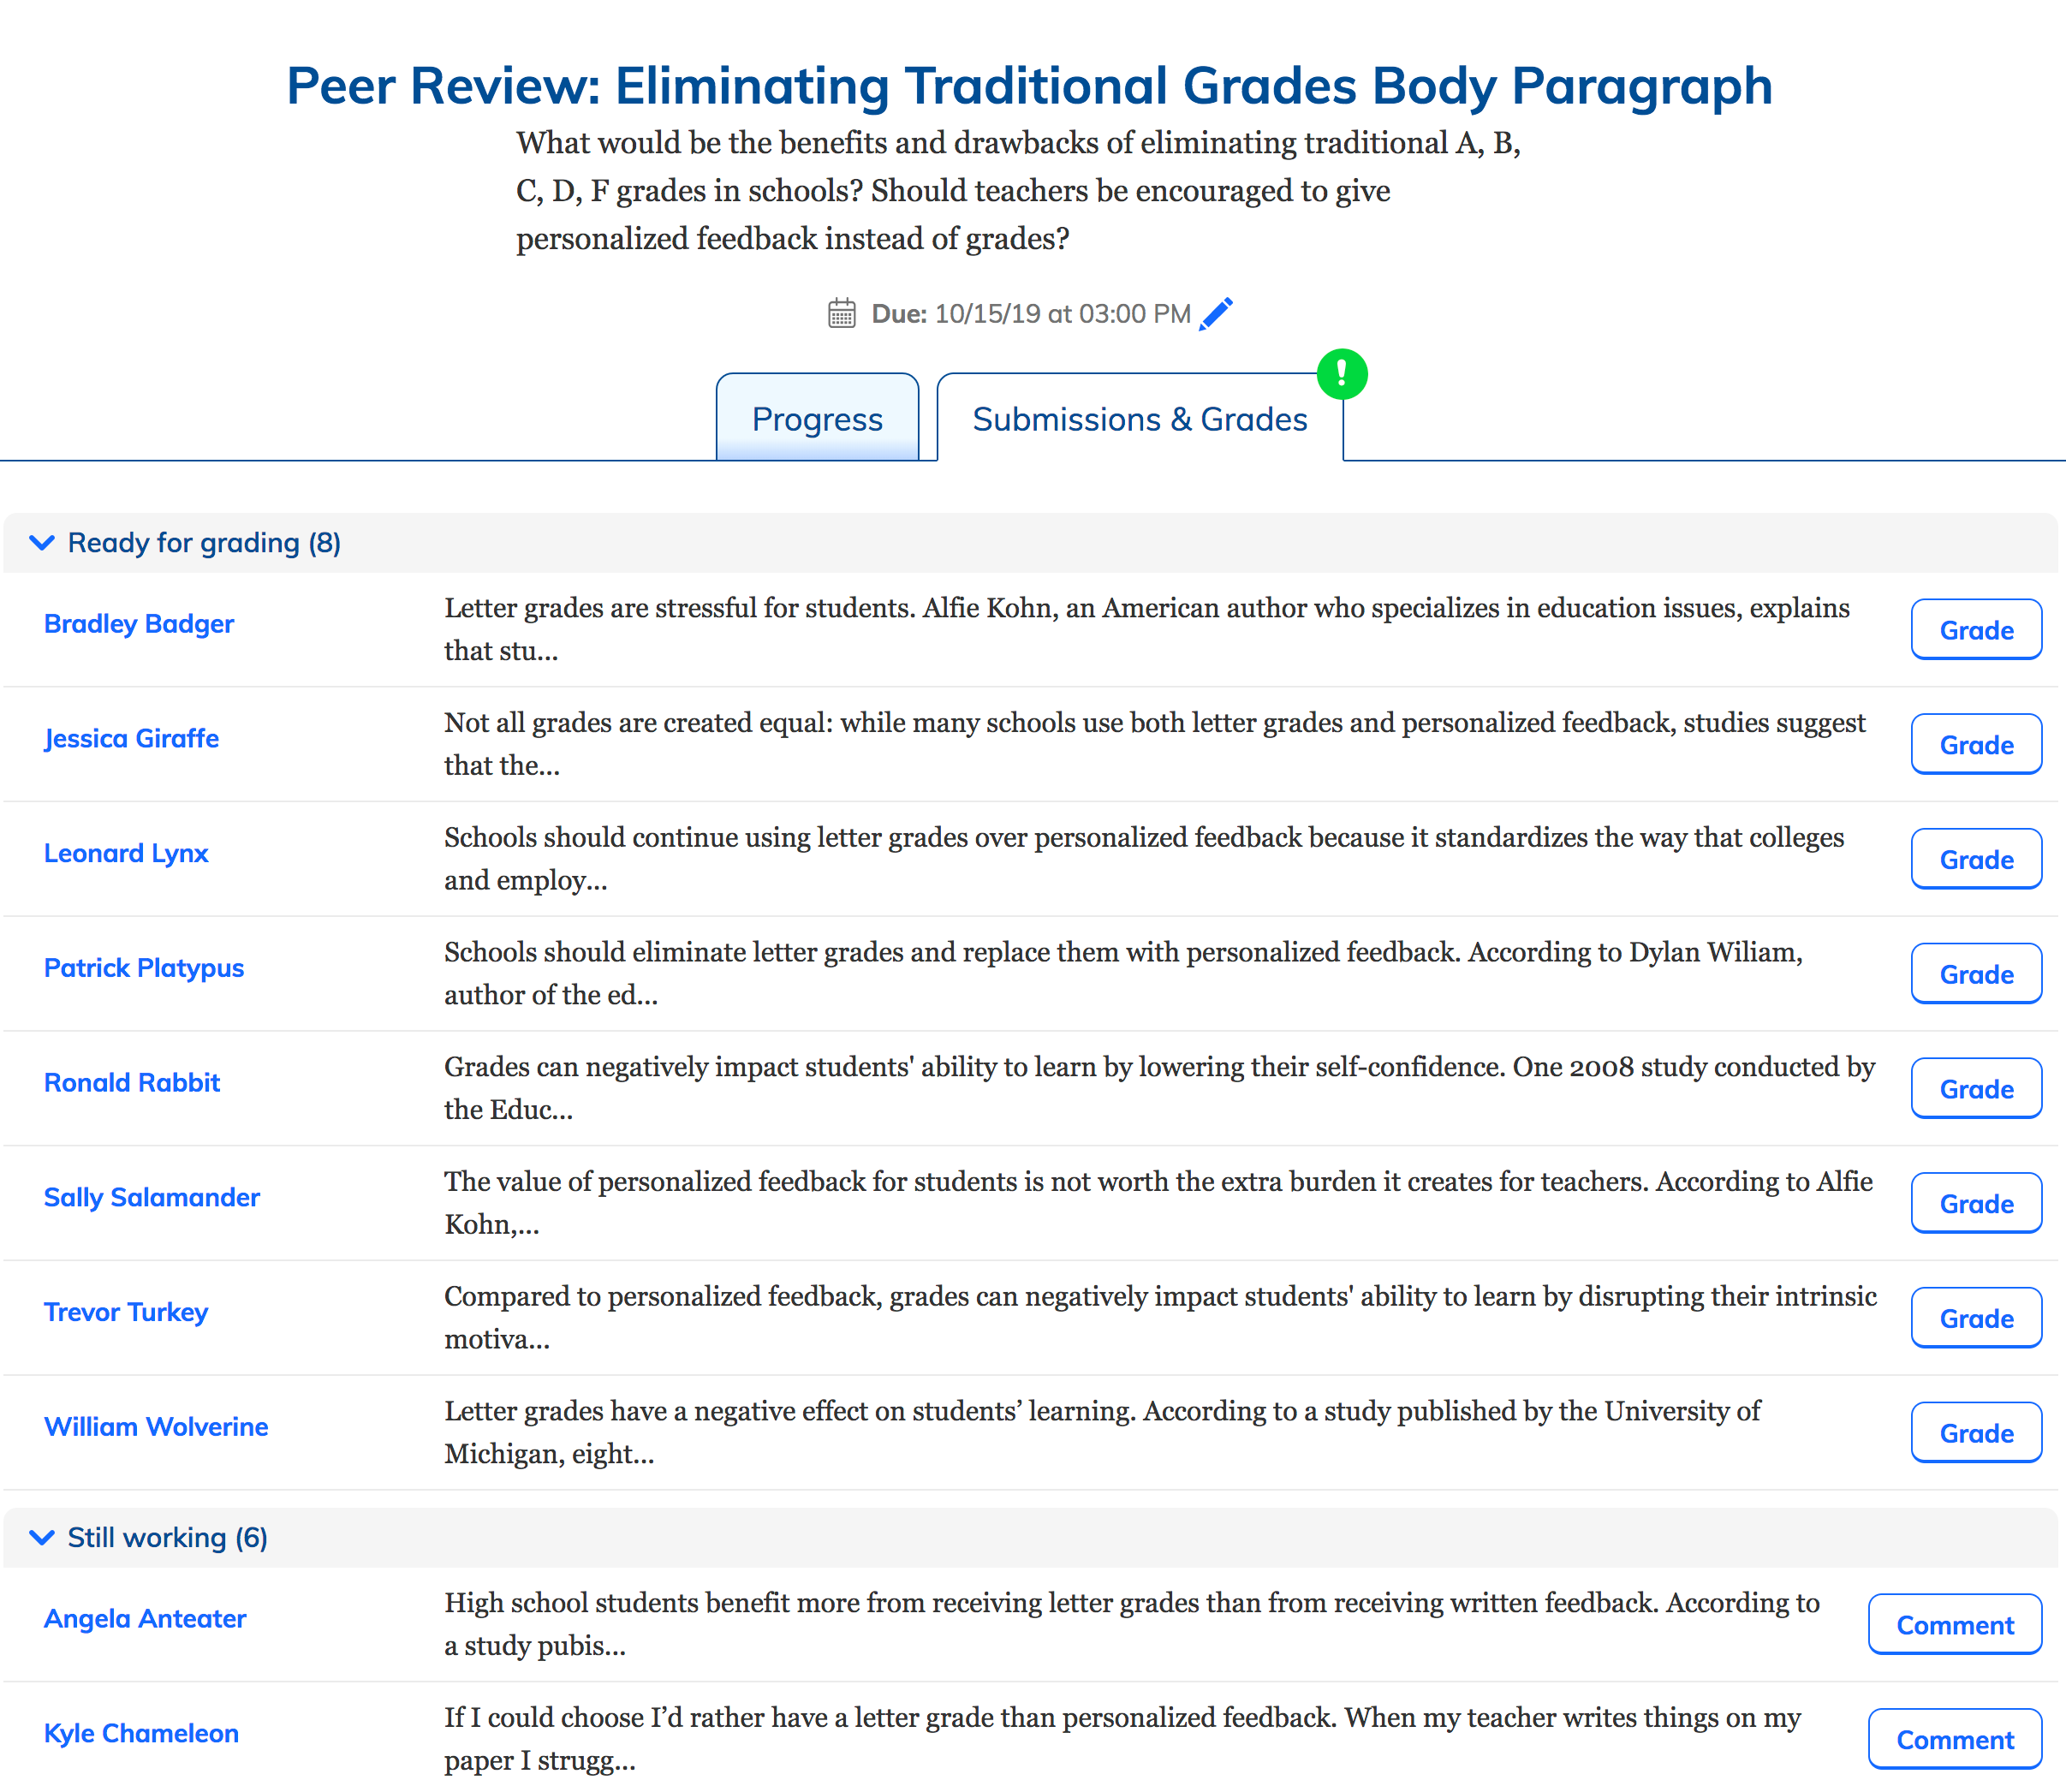 screencapture-demo-noredink-teach-courses-1047503-peer_reviews-447-submissions_and_grades-2018-09-21-13_07_25.png